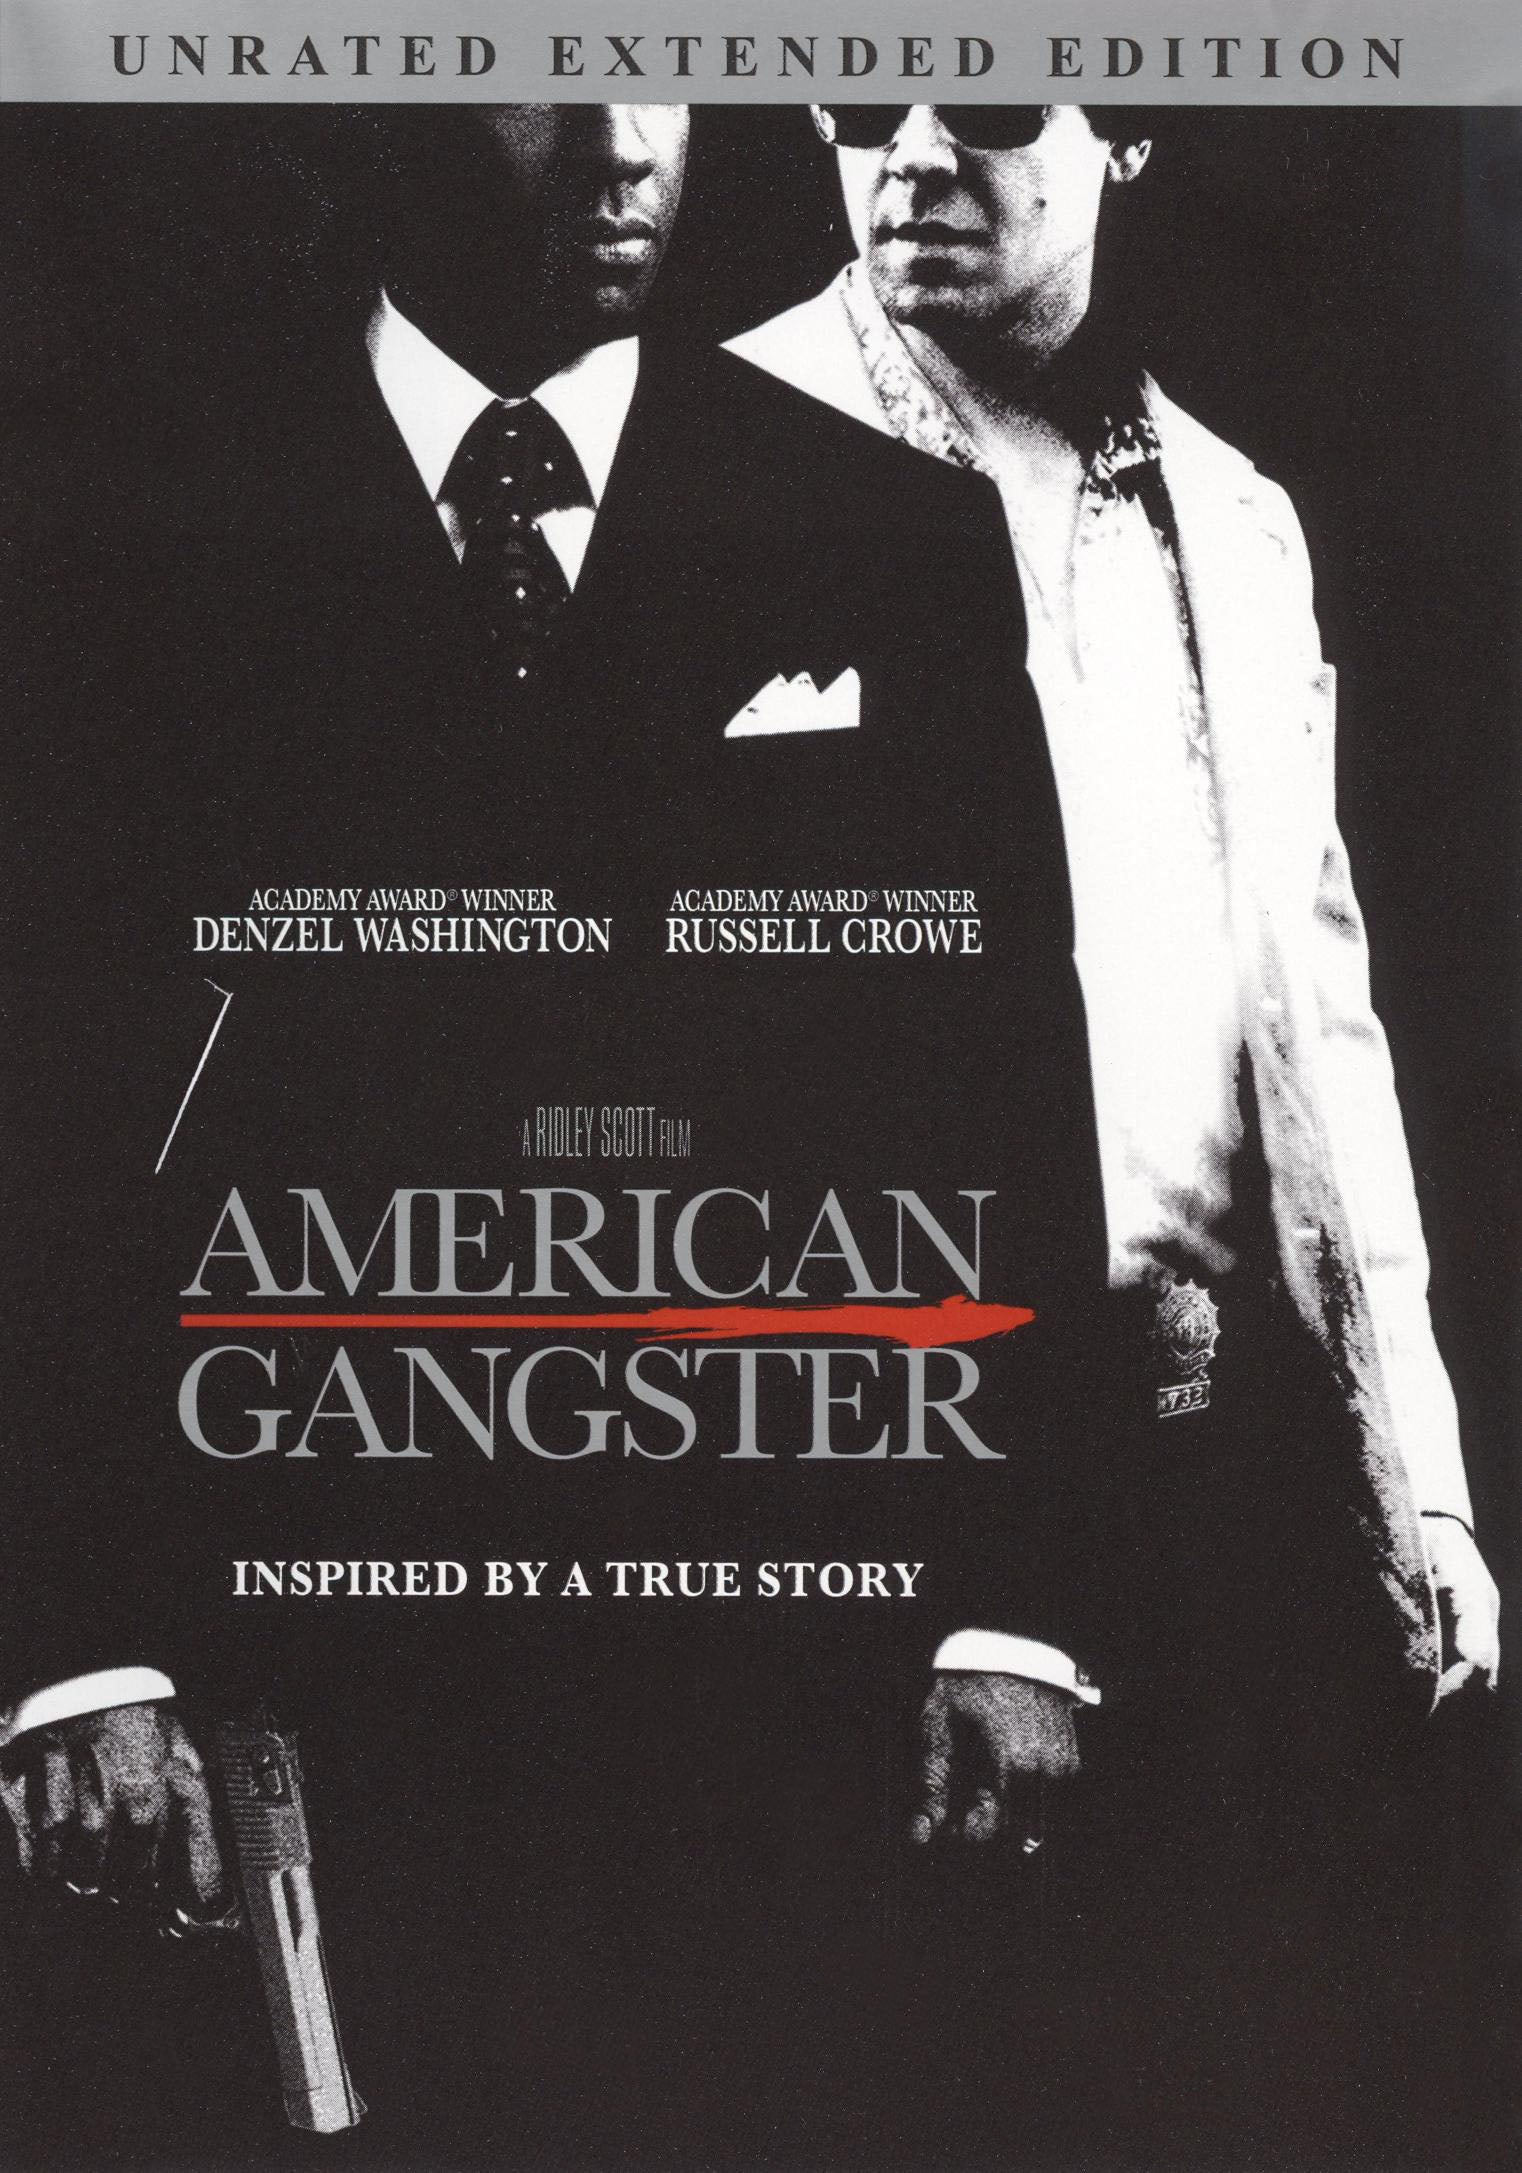 American Gangster [Unrated Extended/Rated Versions] cover art